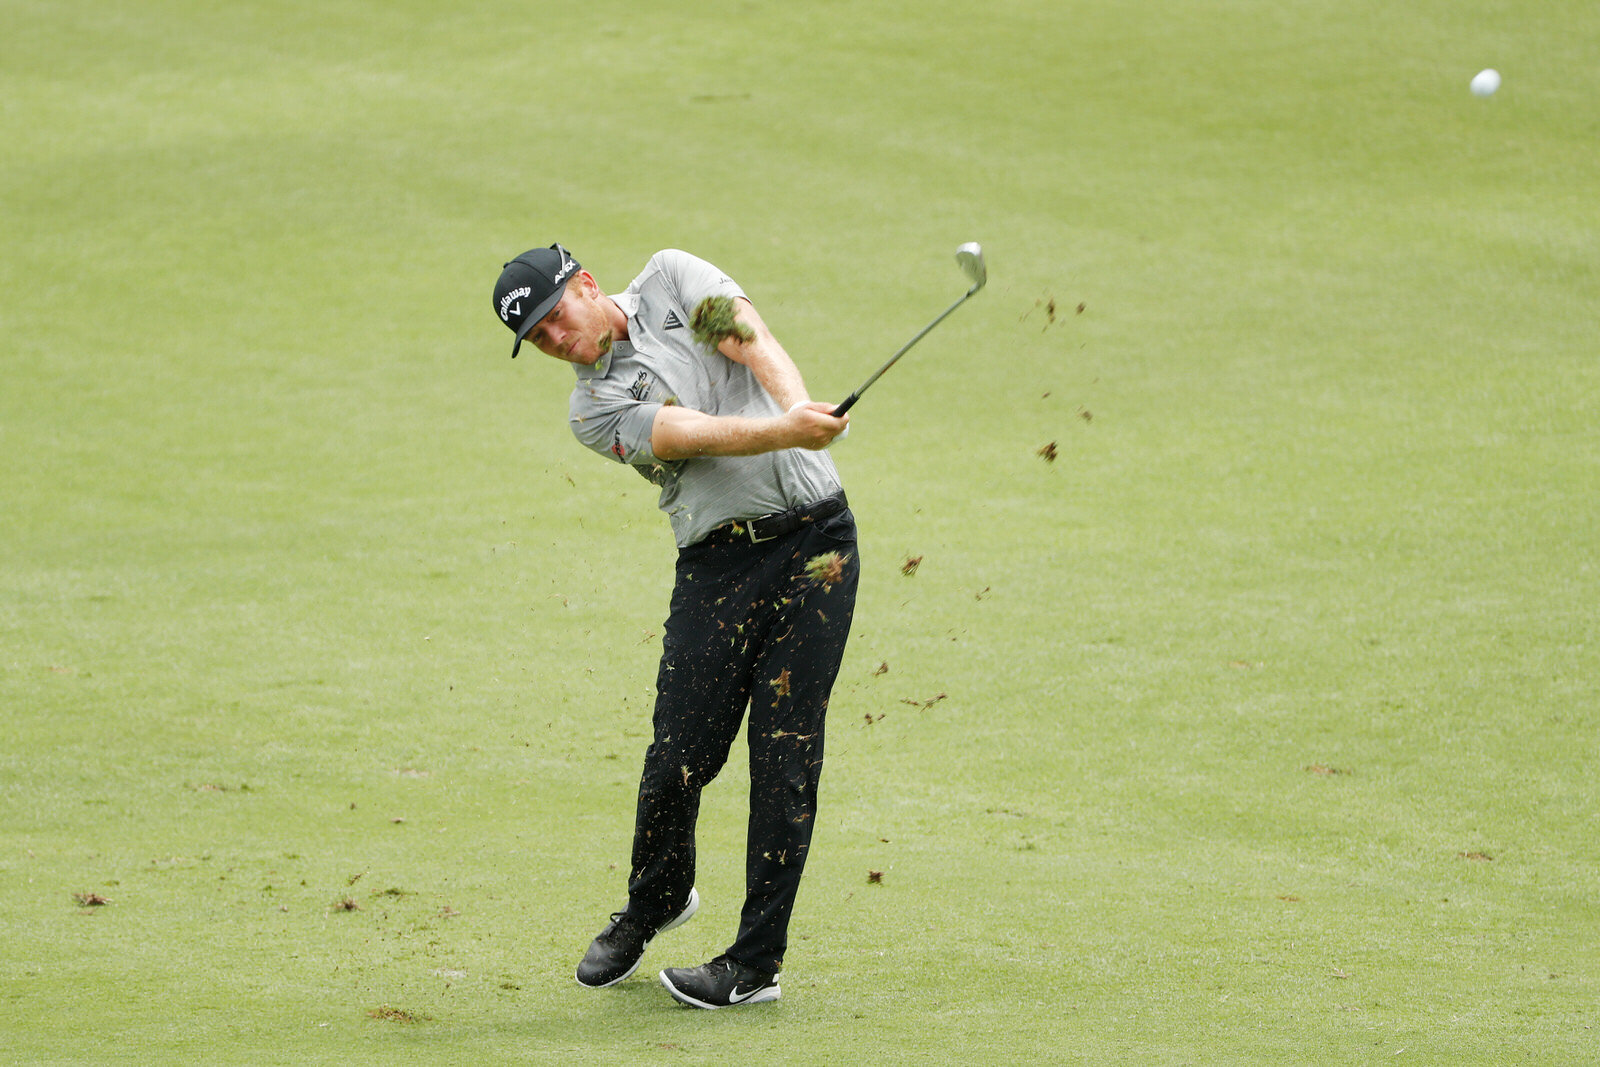  GREENSBORO, NORTH CAROLINA - AUGUST 14: Talor Gooch of the United States plays his second shot on the ninth hole during the second round of the Wyndham Championship at  Sedgefield Country Club on August 14, 2020 in Greensboro, North Carolina. (Photo